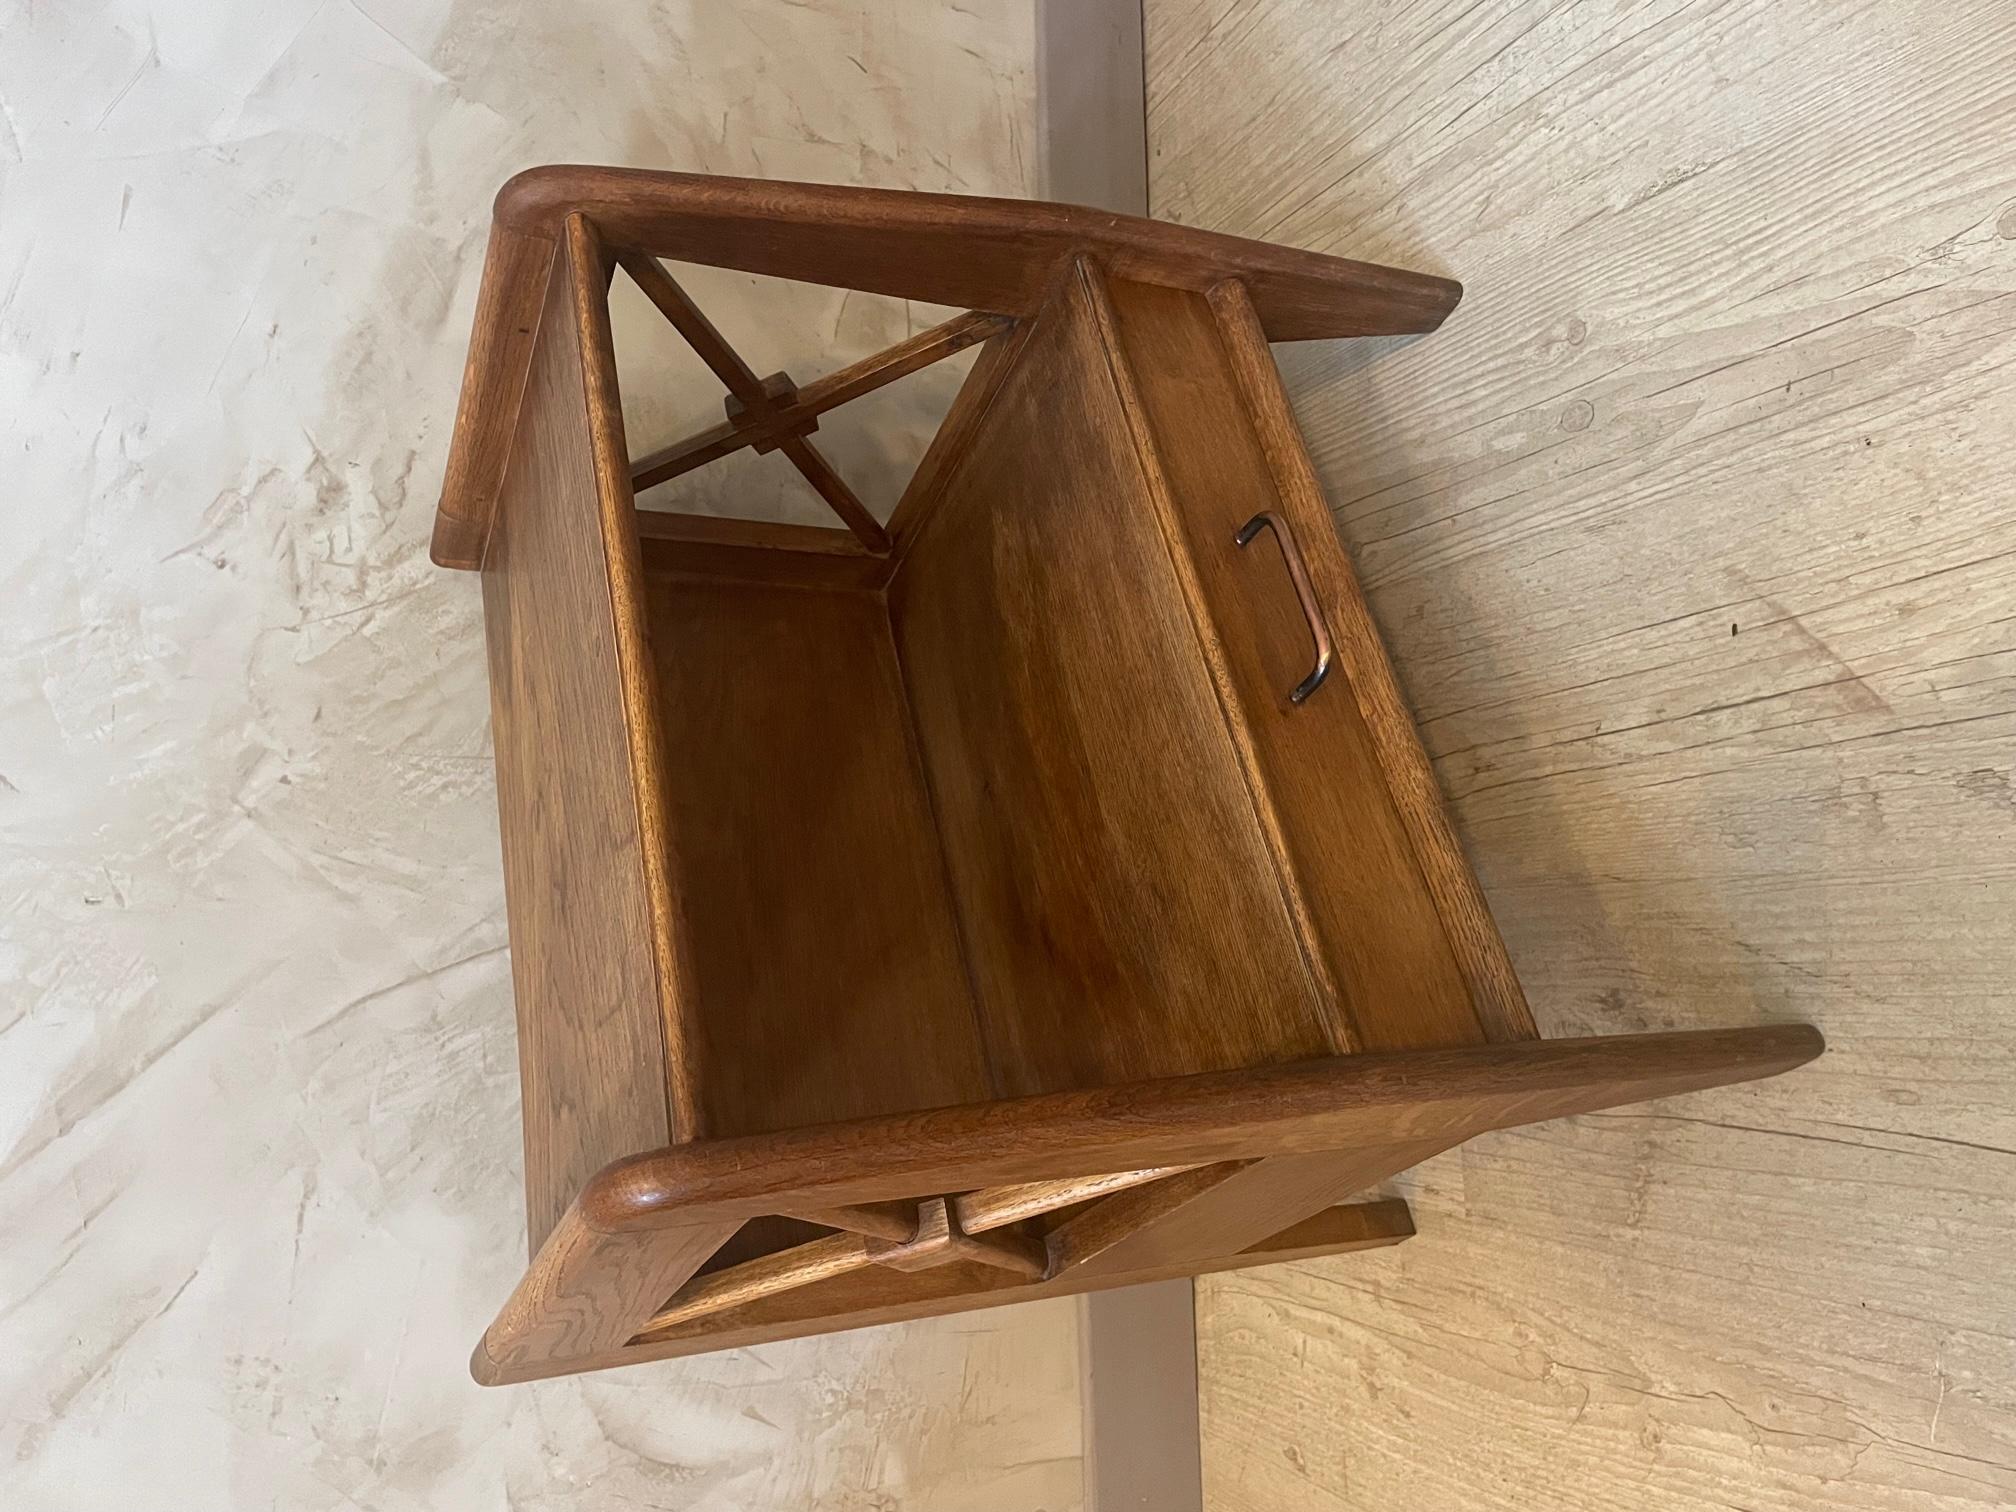 Very nice 20th century Jacques Adnet oak side table from the 1960s. 
One drawer with a copper handle. 
Very good condition.